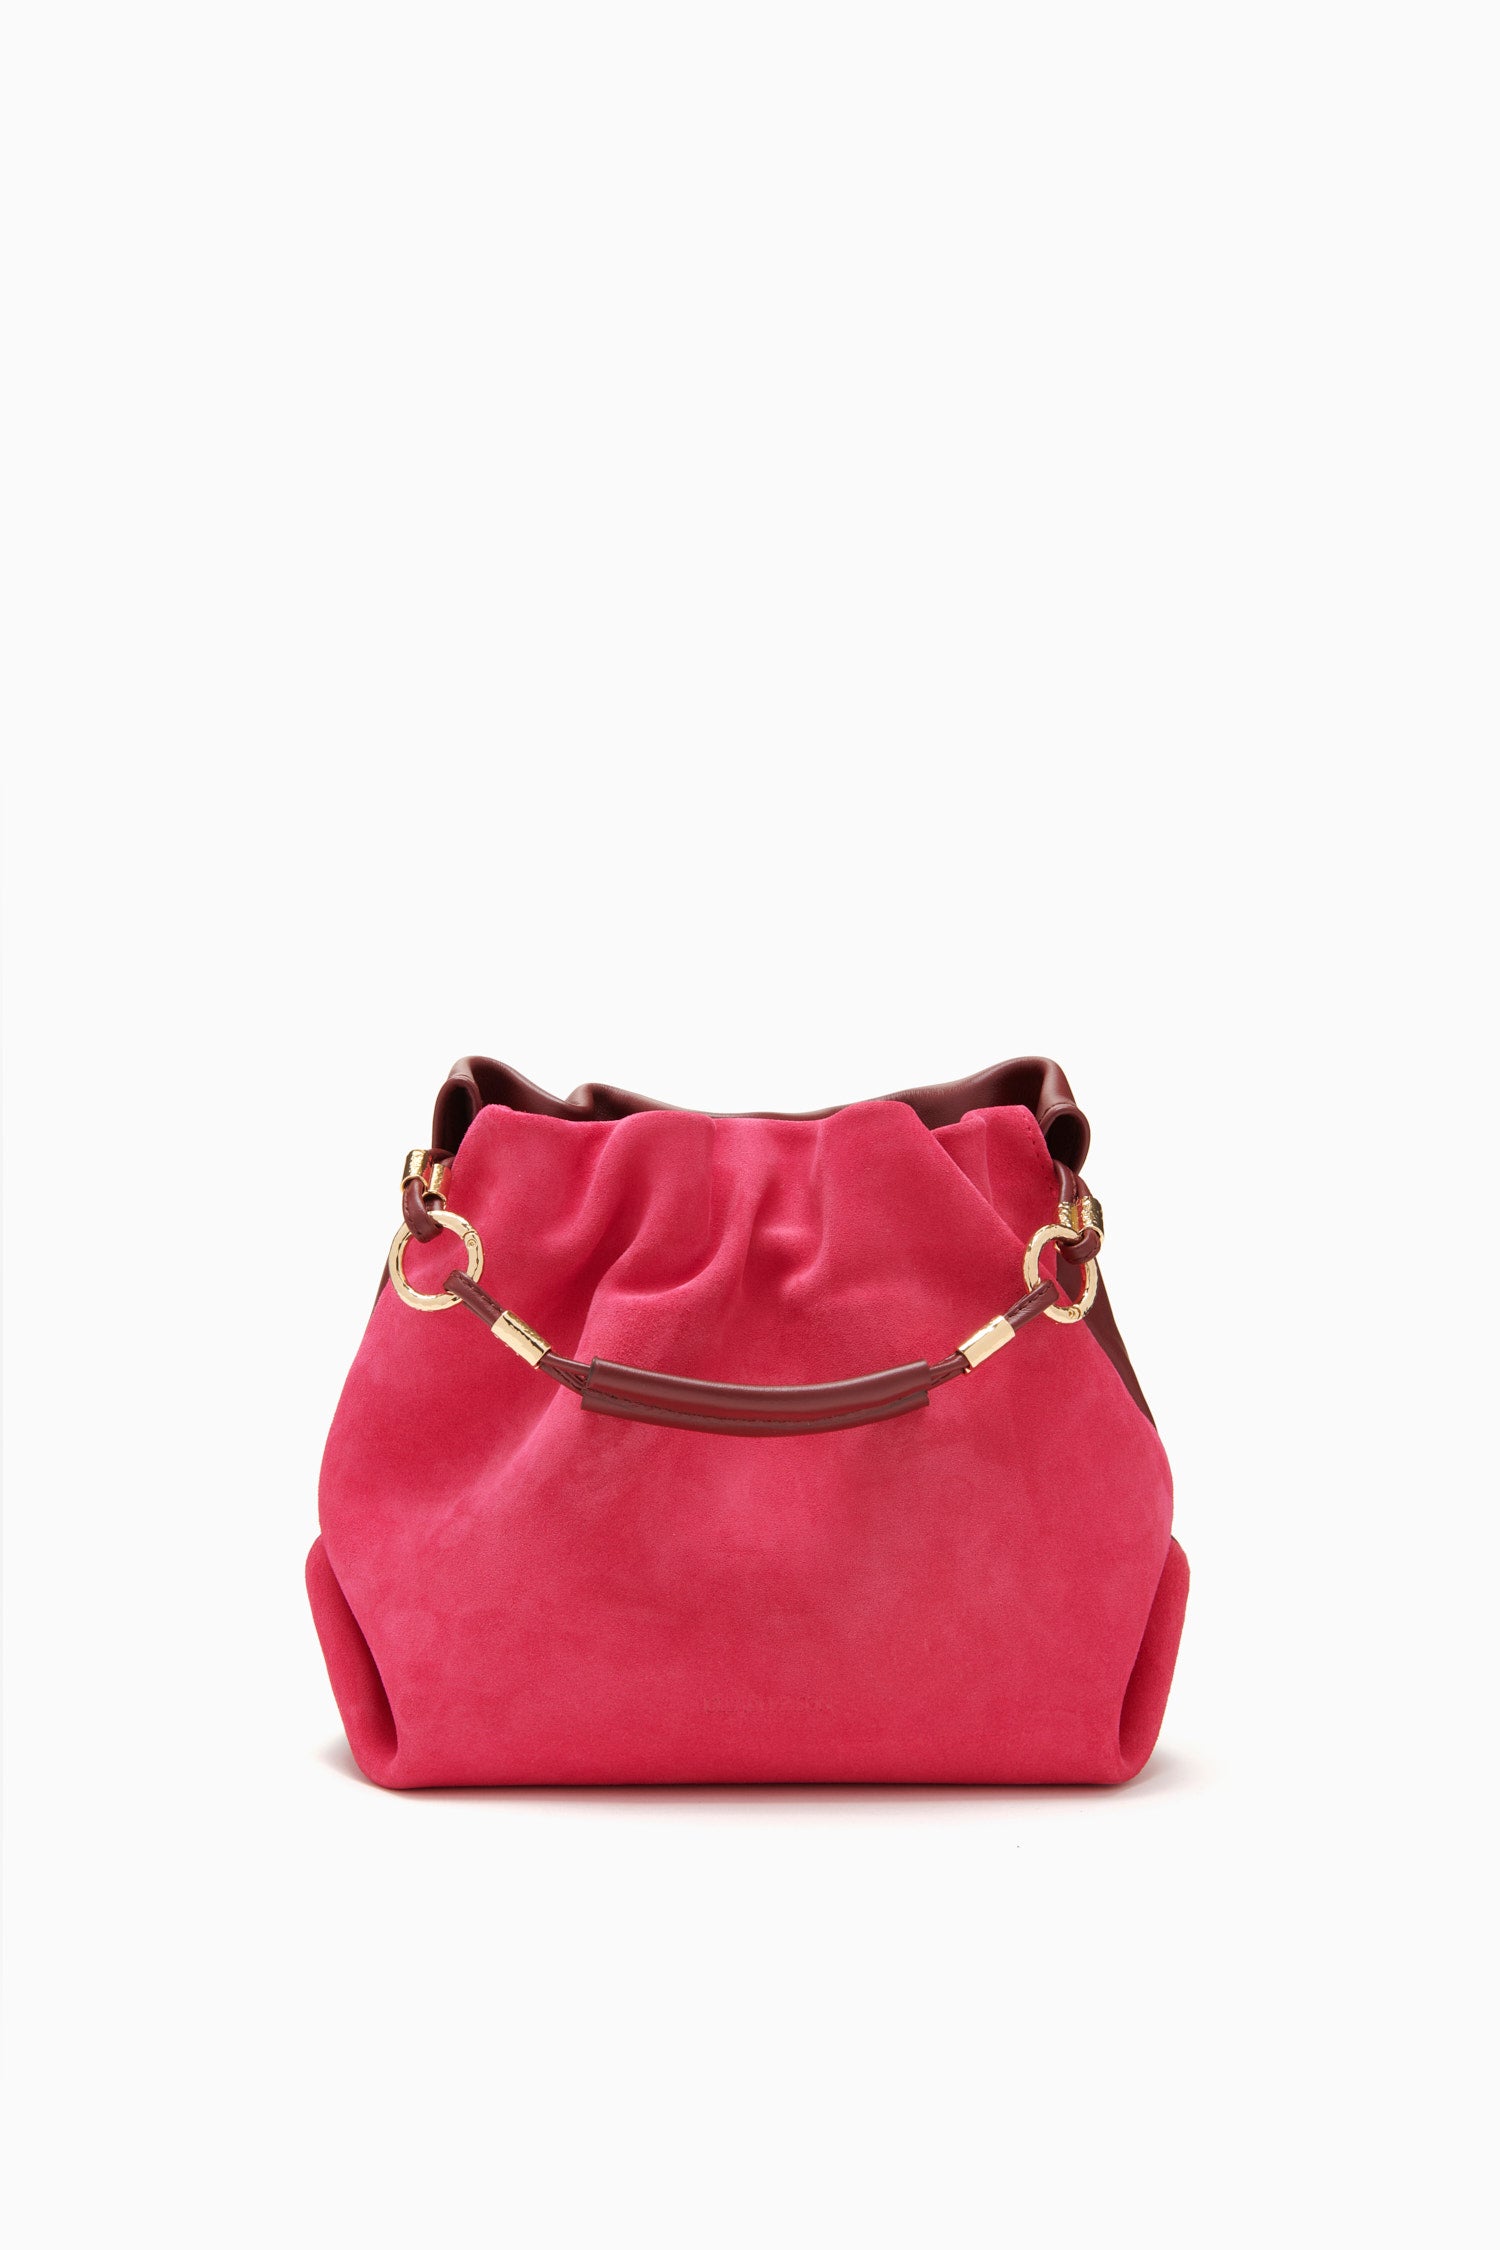 Ulla Johnson Remy Mini Suede and Leather Shoulder Bag